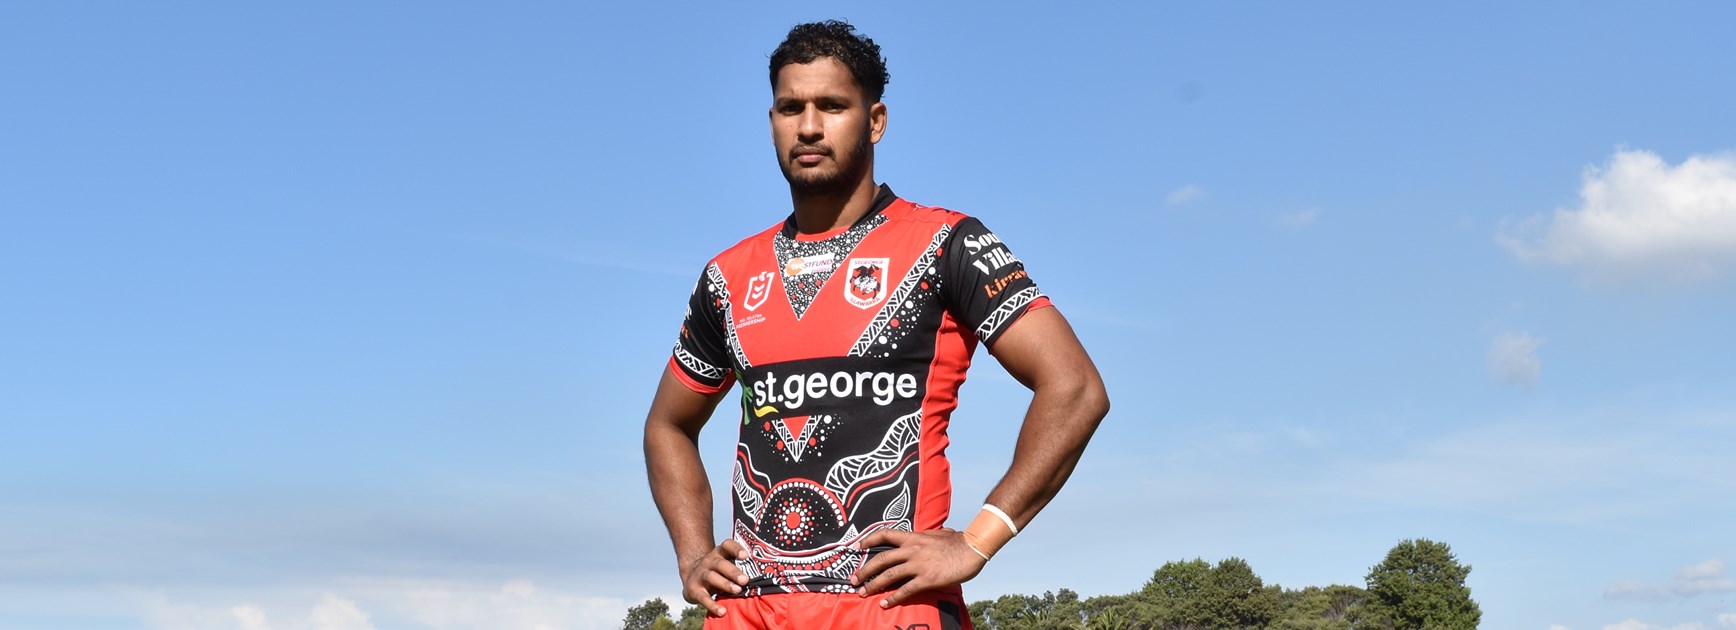 2020 Indigenous jersey design competition